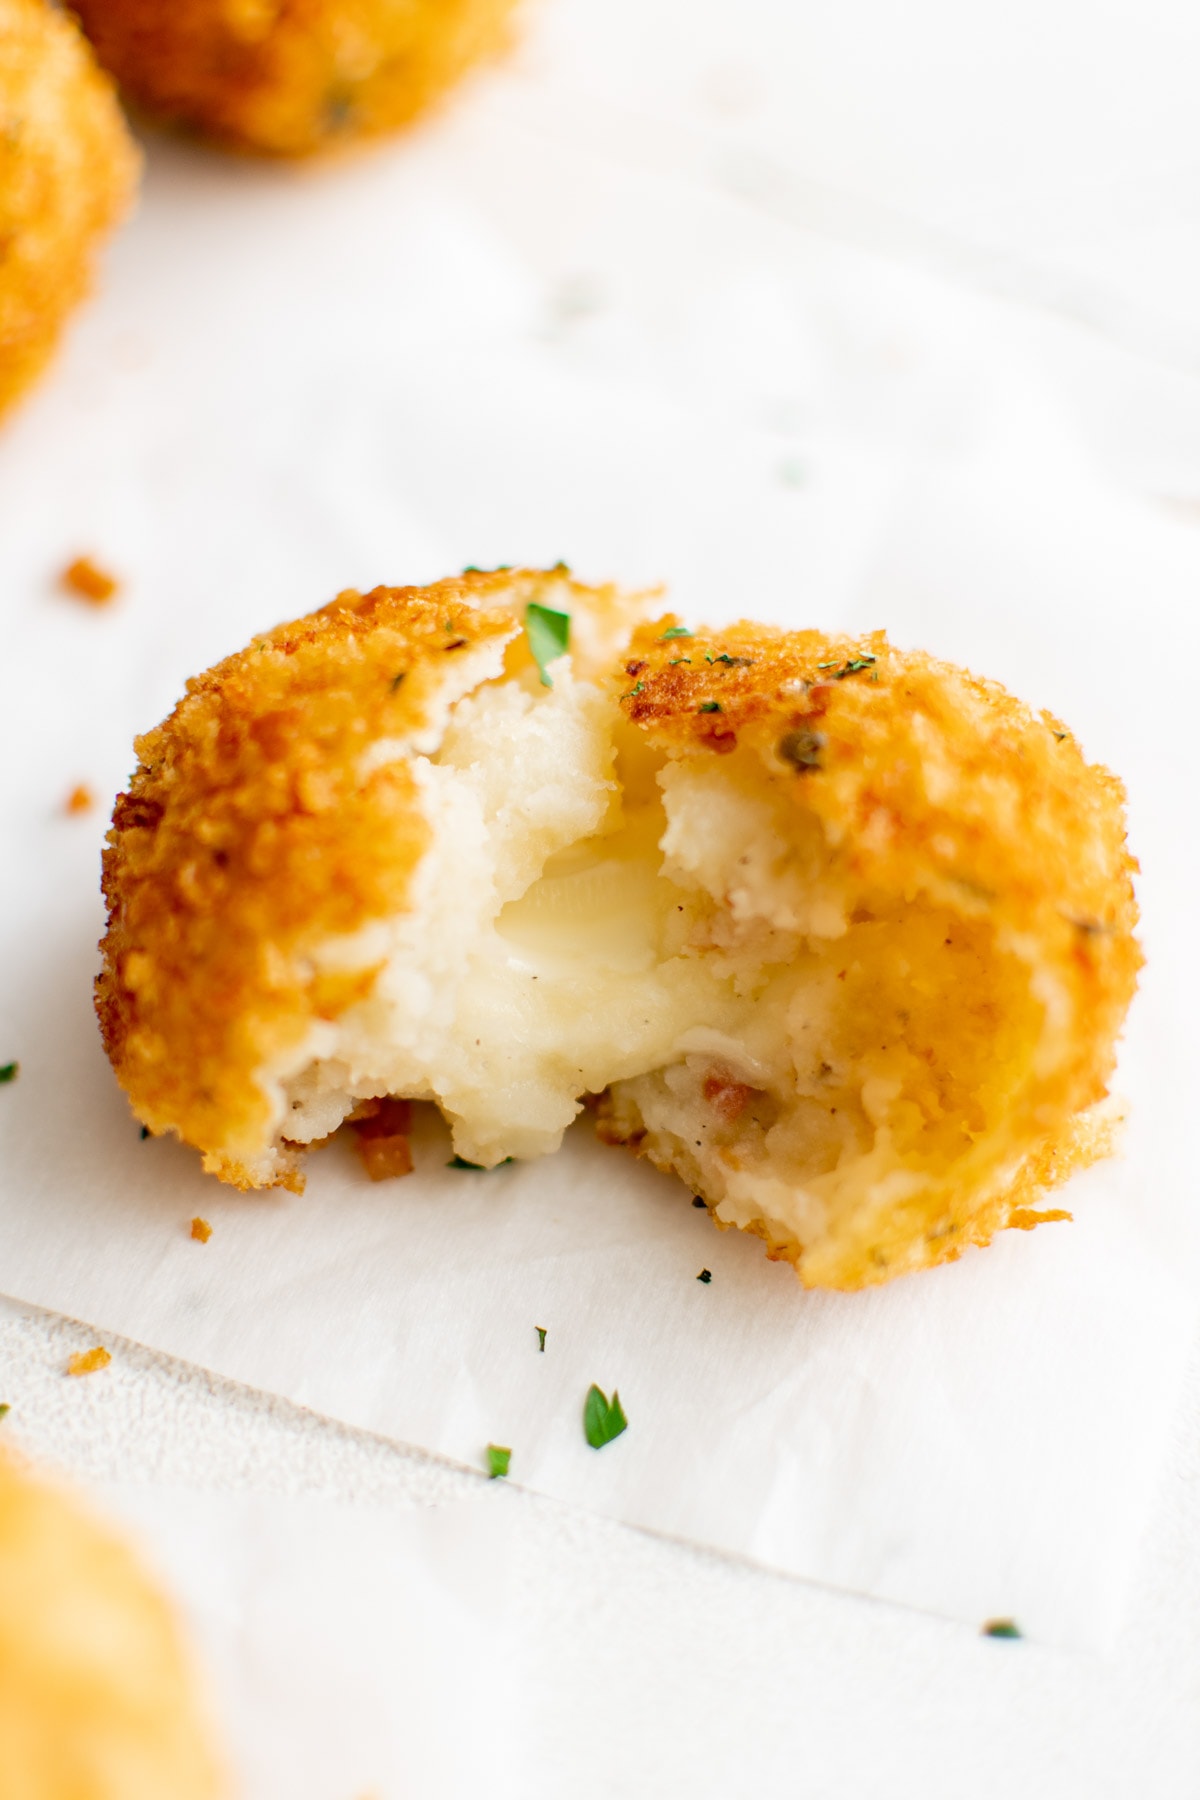 Crispy potato ball with cheese oozing out of it.